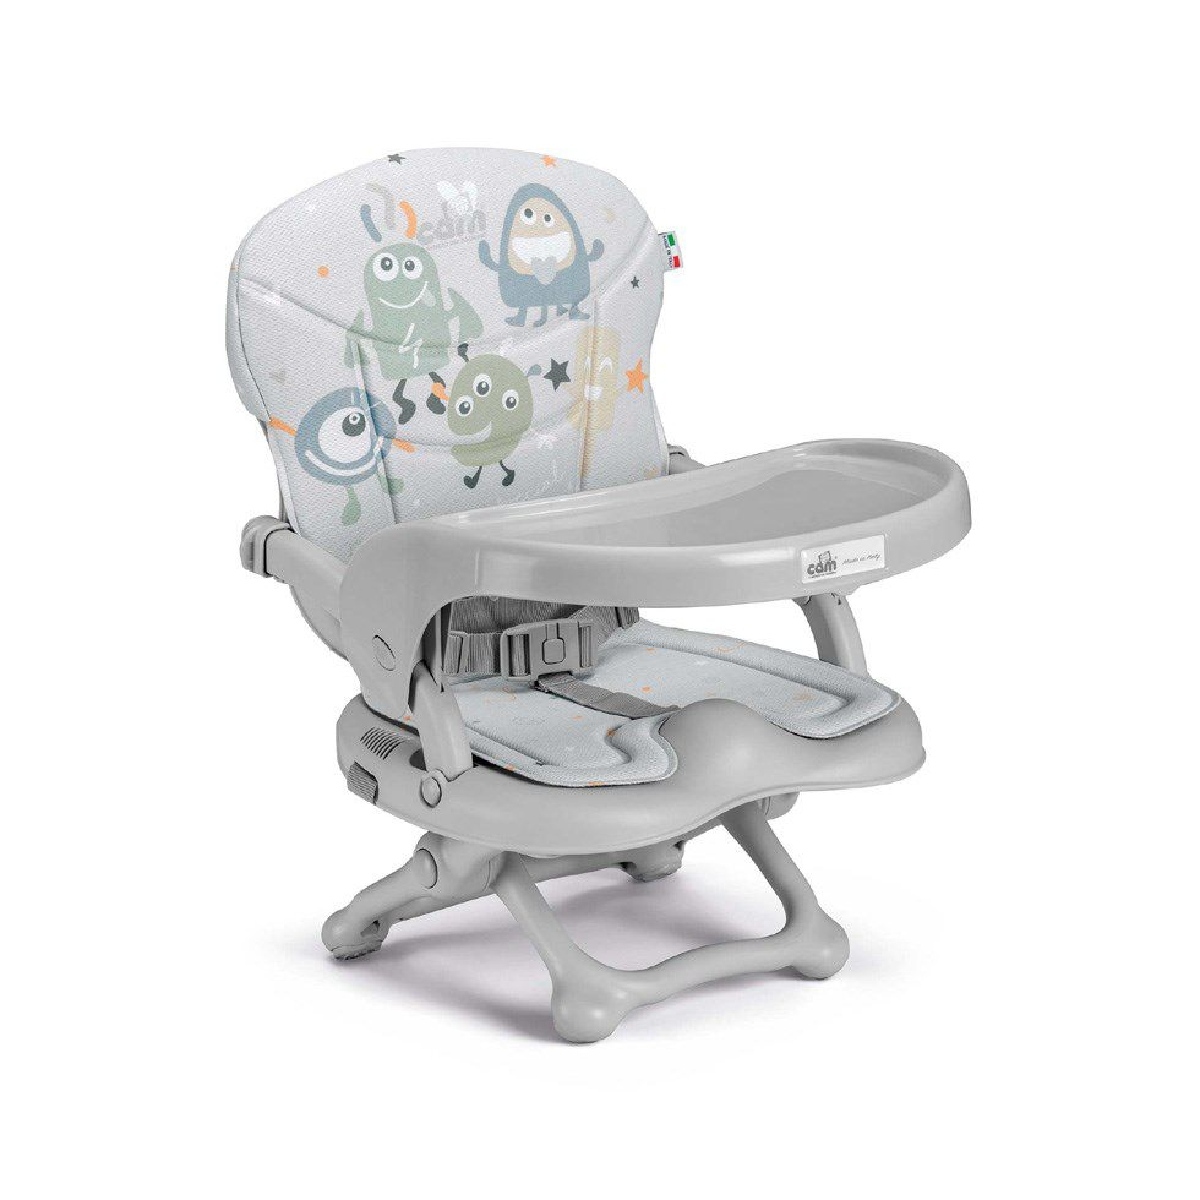 baby shop Cam - Smarty Pop Booster Feeding Chair - Mostriciattoli